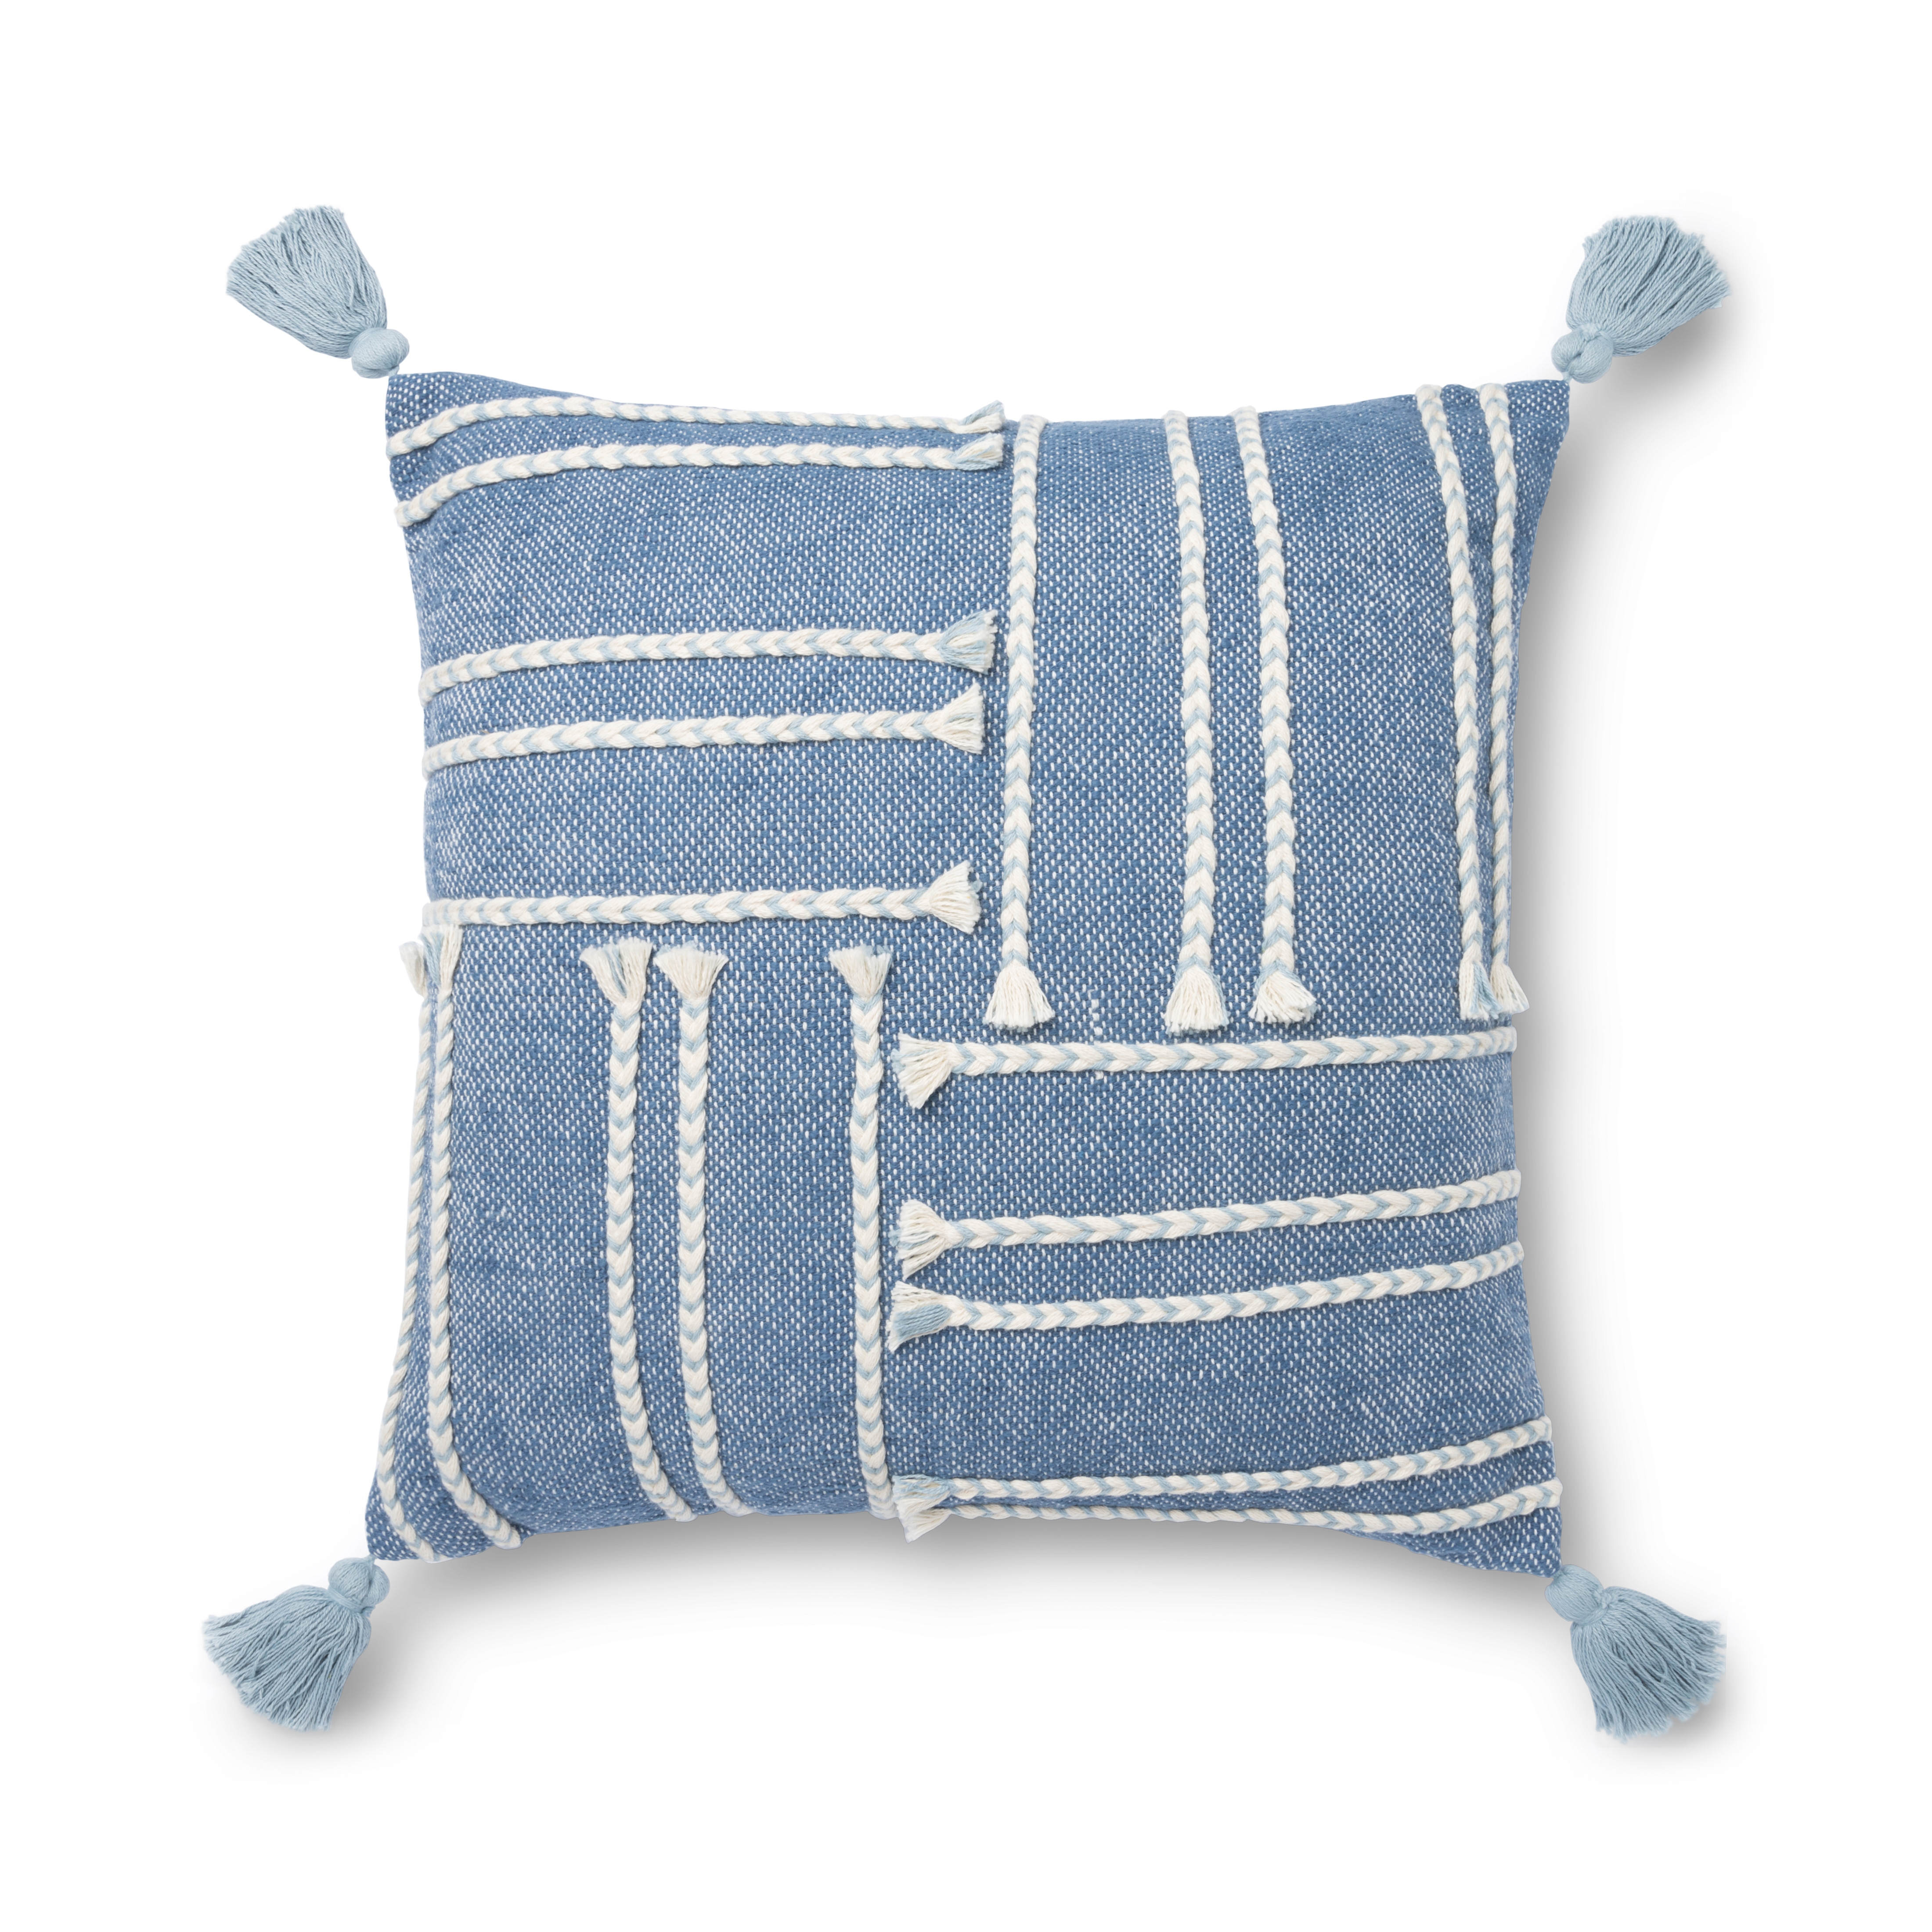 Fringe Rope Throw Pillow Cover, Blue, 18" x 18" - Image 0